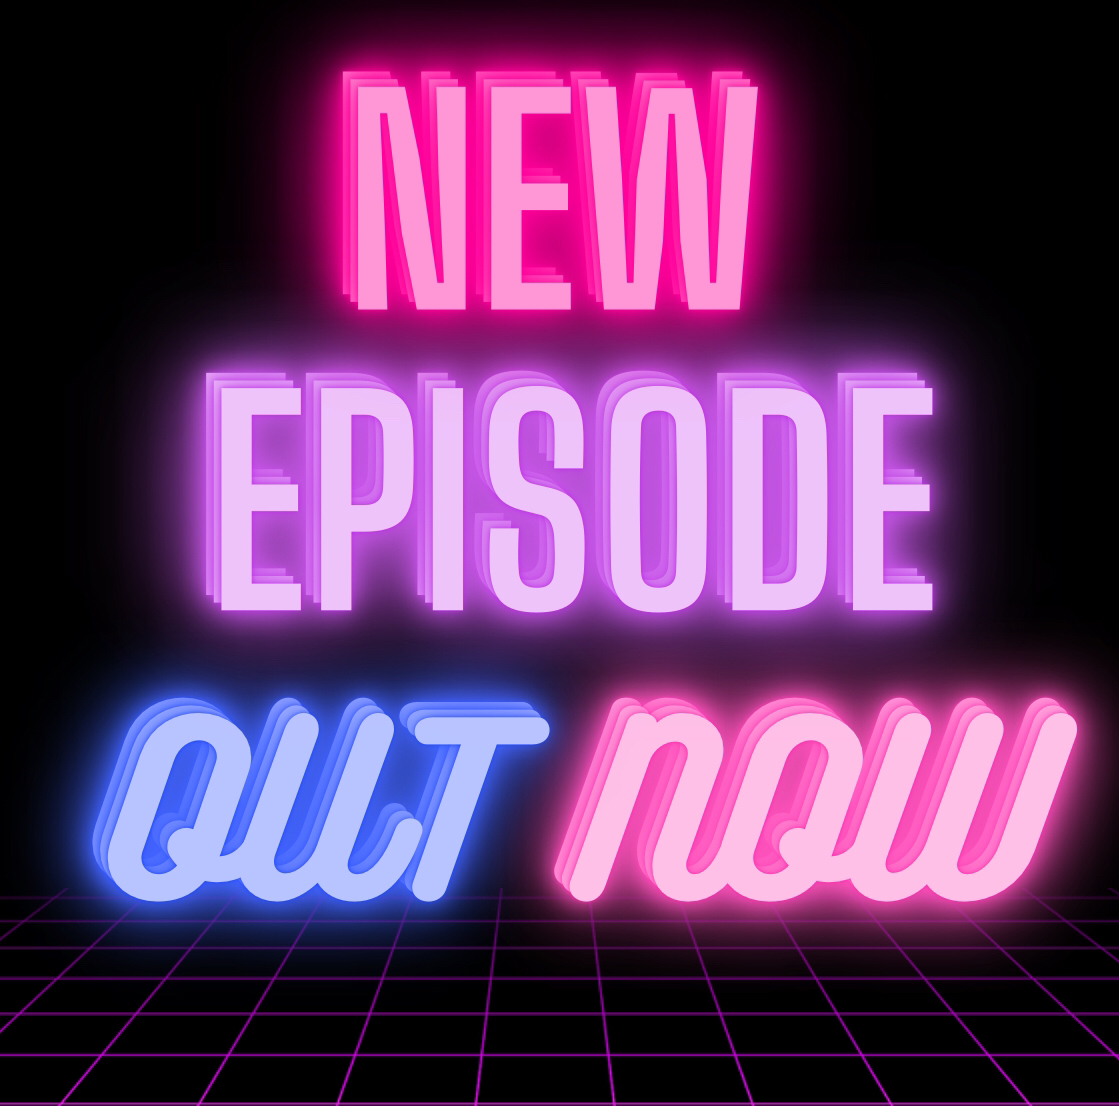 Our first episode is officially out! Go check it out! #LQTA #podcast #firstepisode 
open.spotify.com/episode/0ysPxu…